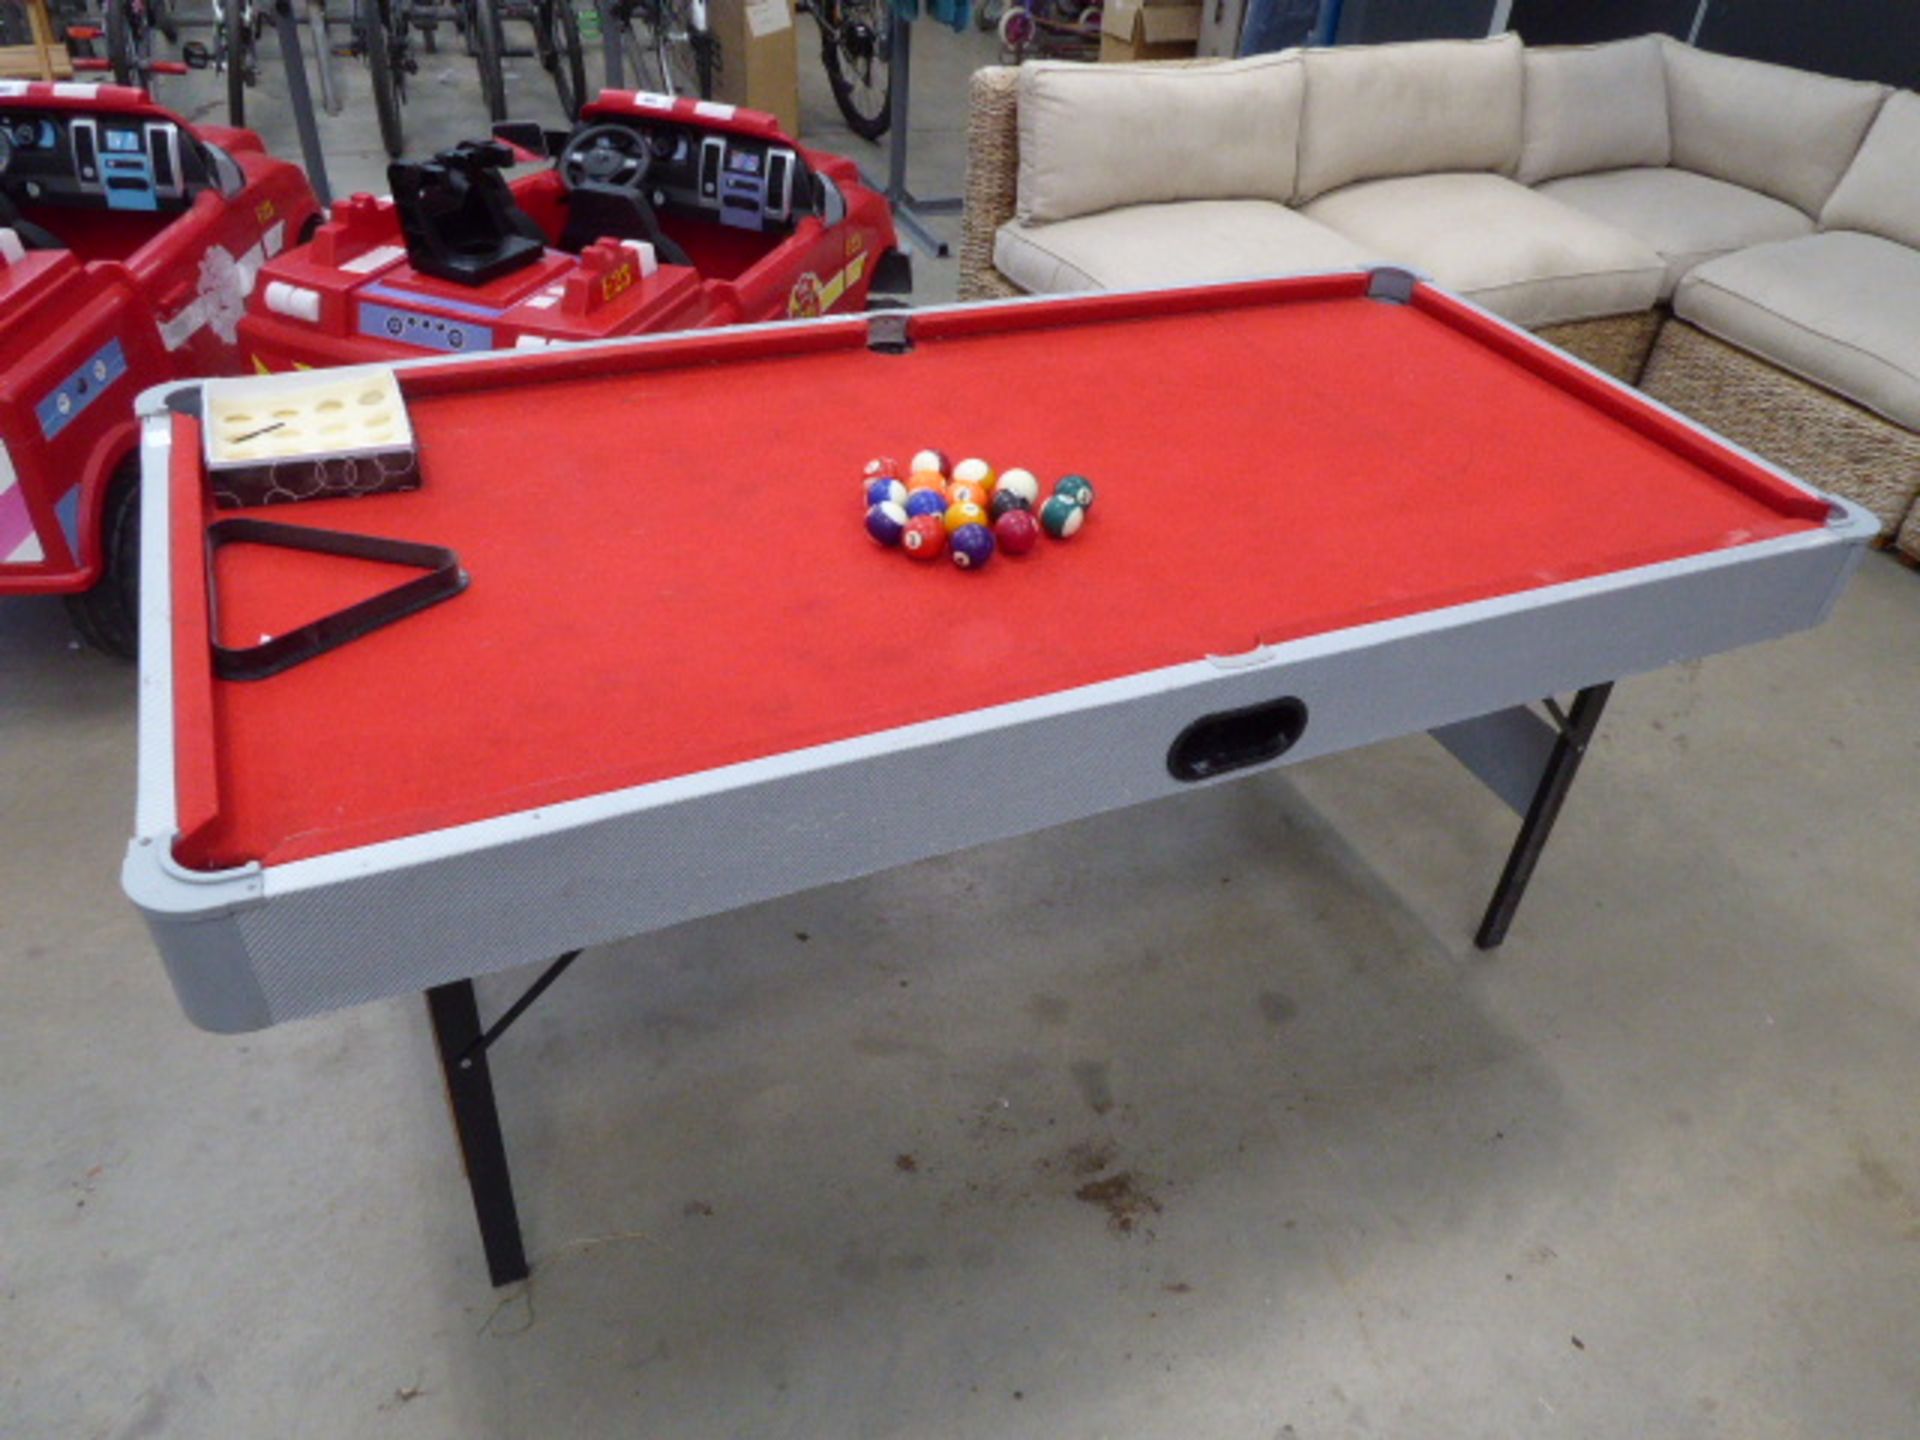 Folding pool table with balls